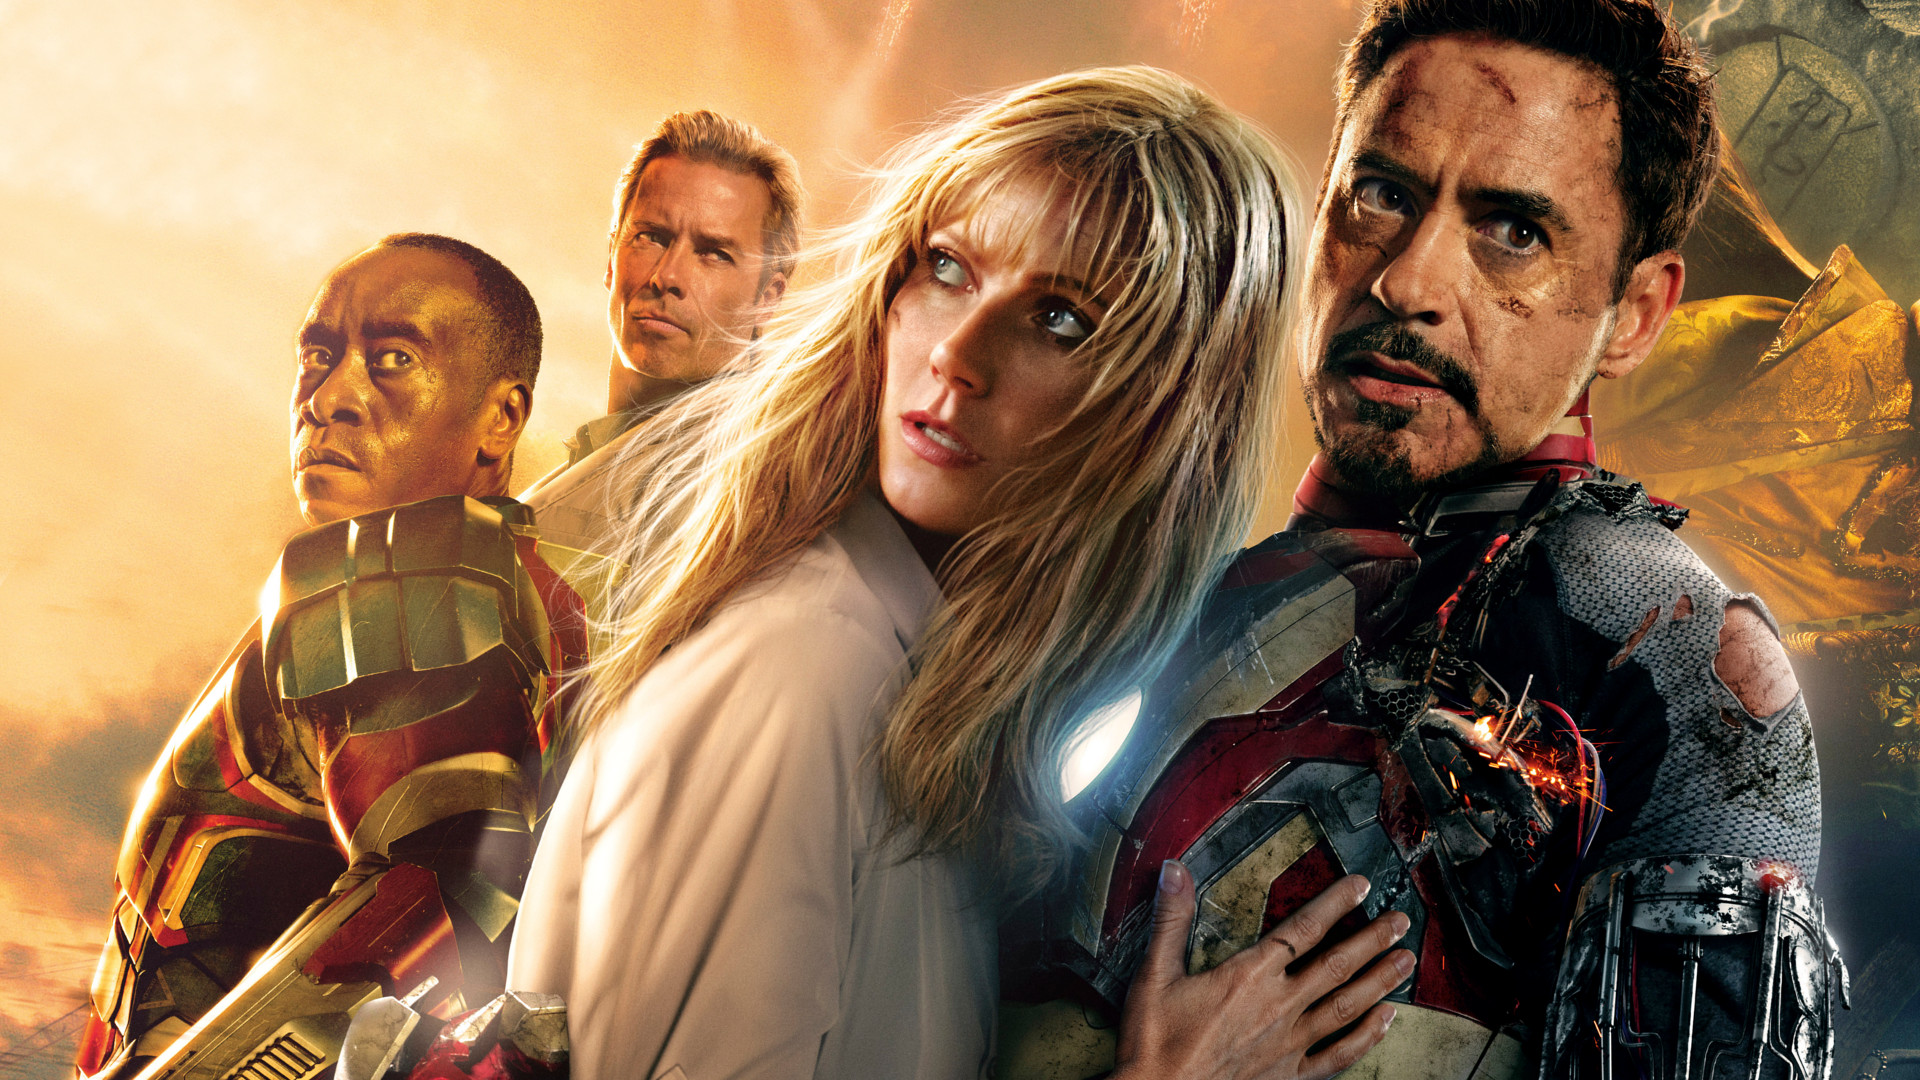 Iron Man 3 download the new version for iphone